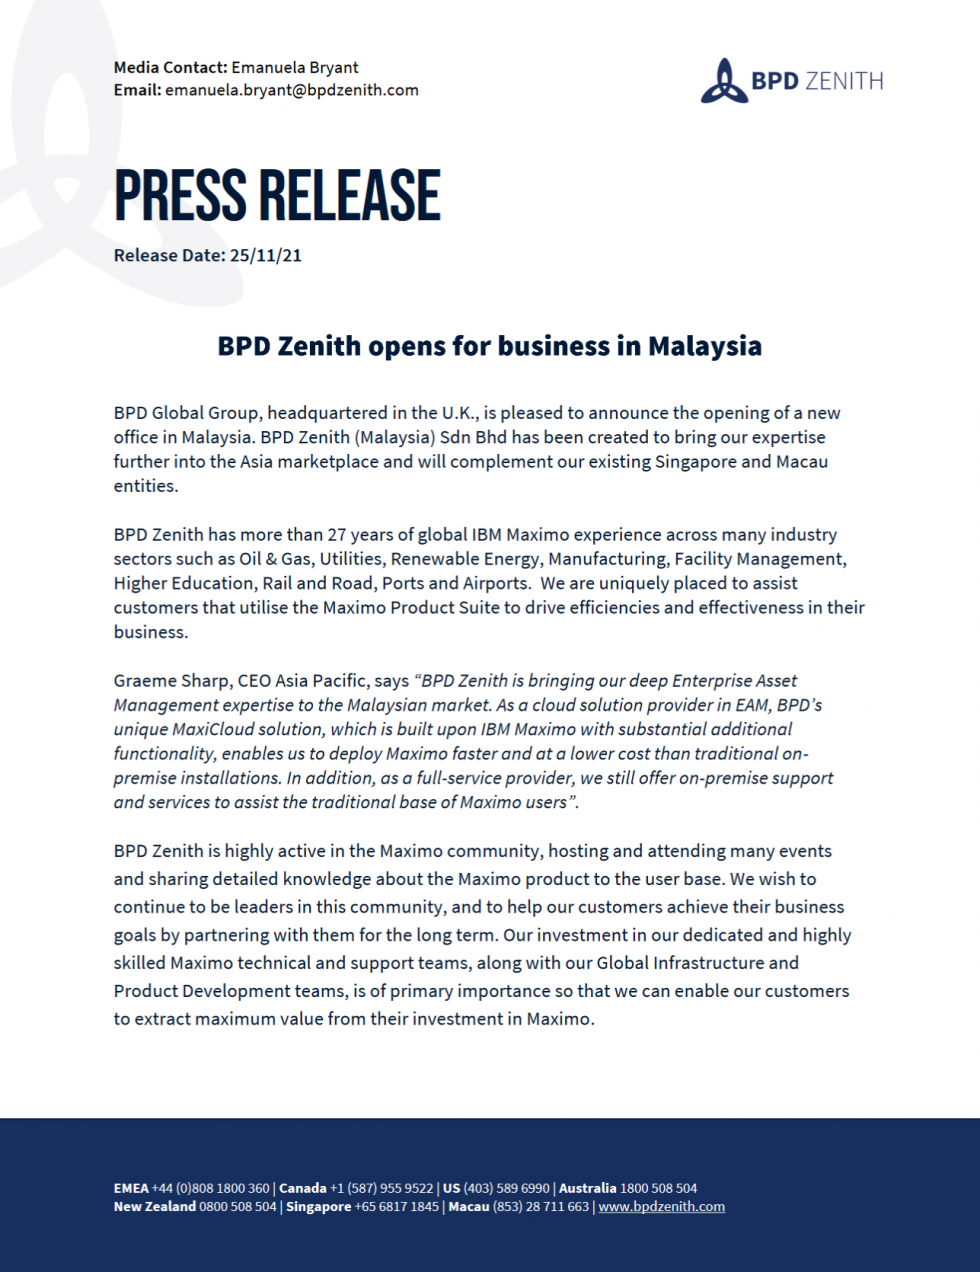 BPD Zenith Malaysia opens for business